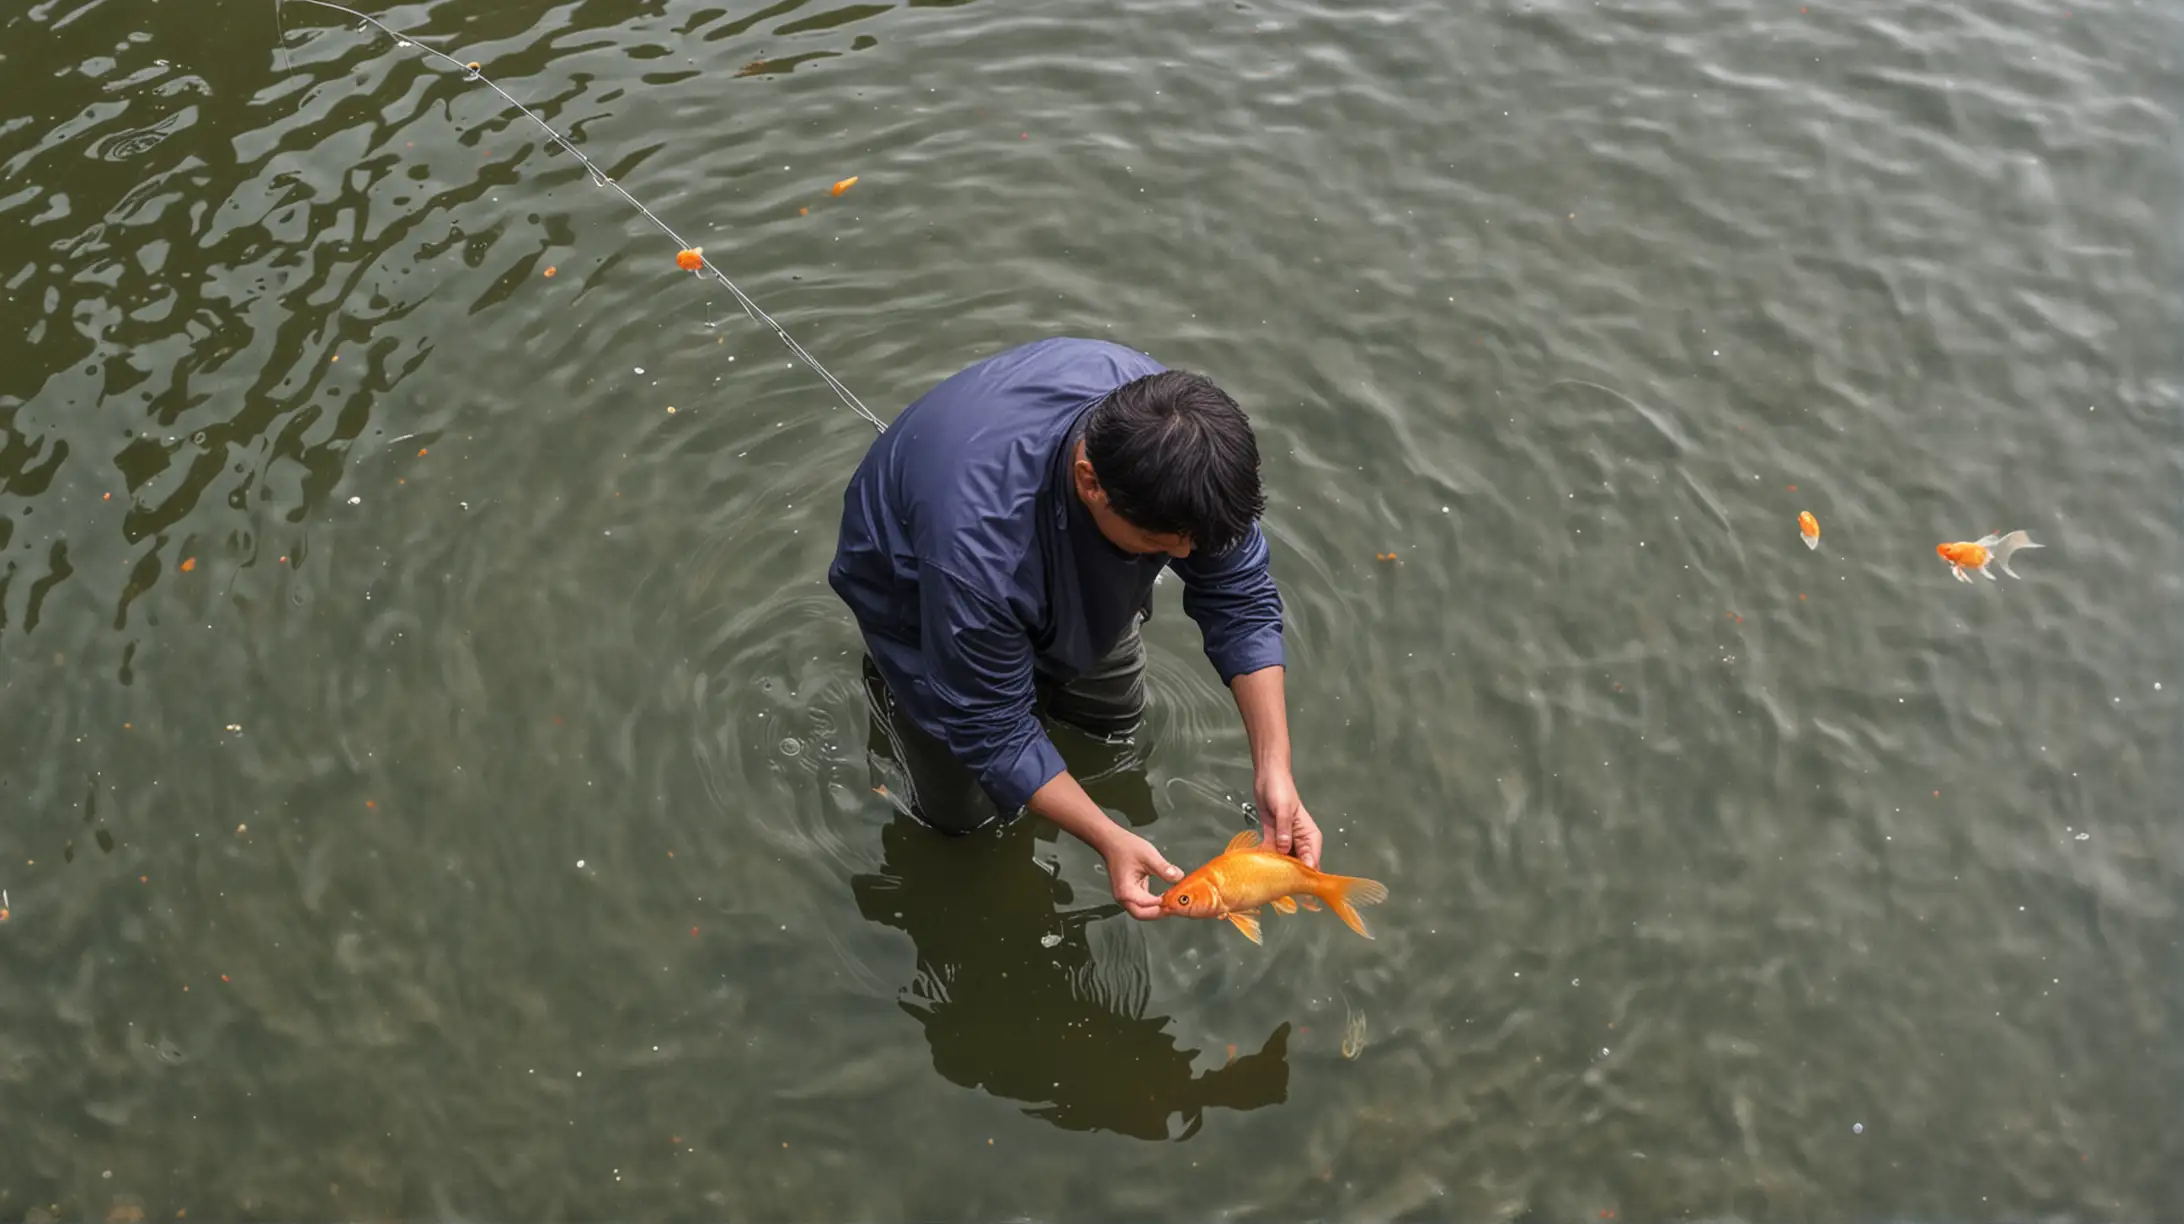 A Poor Fishermans Encounter with a Magical Goldfish